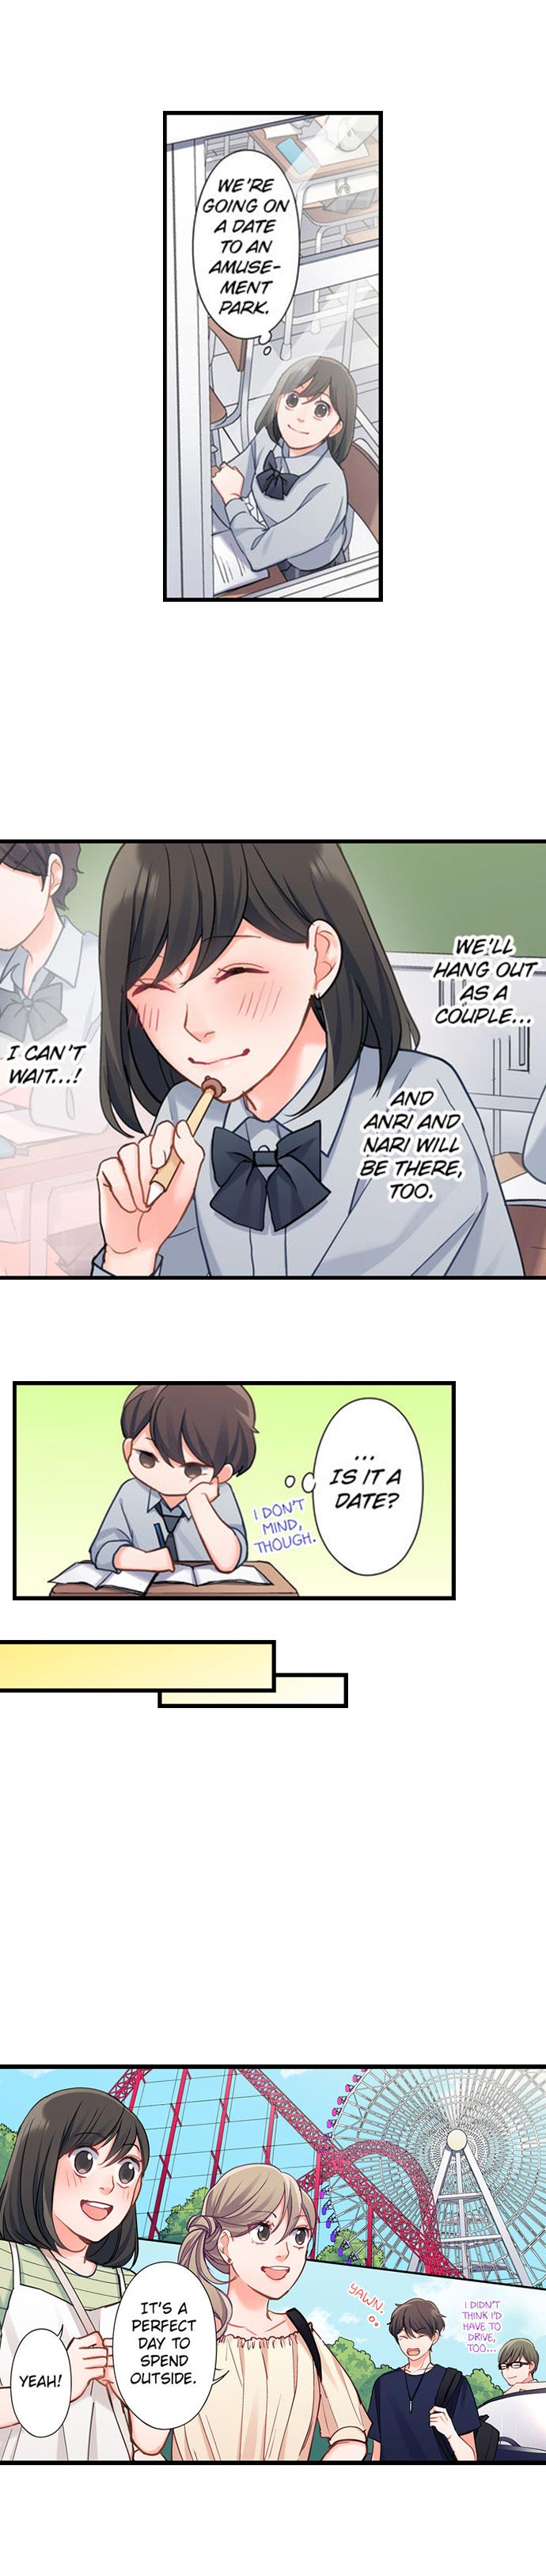 15 Years Old Starting Today Well Be Living Together - Chapter 89 Page 8